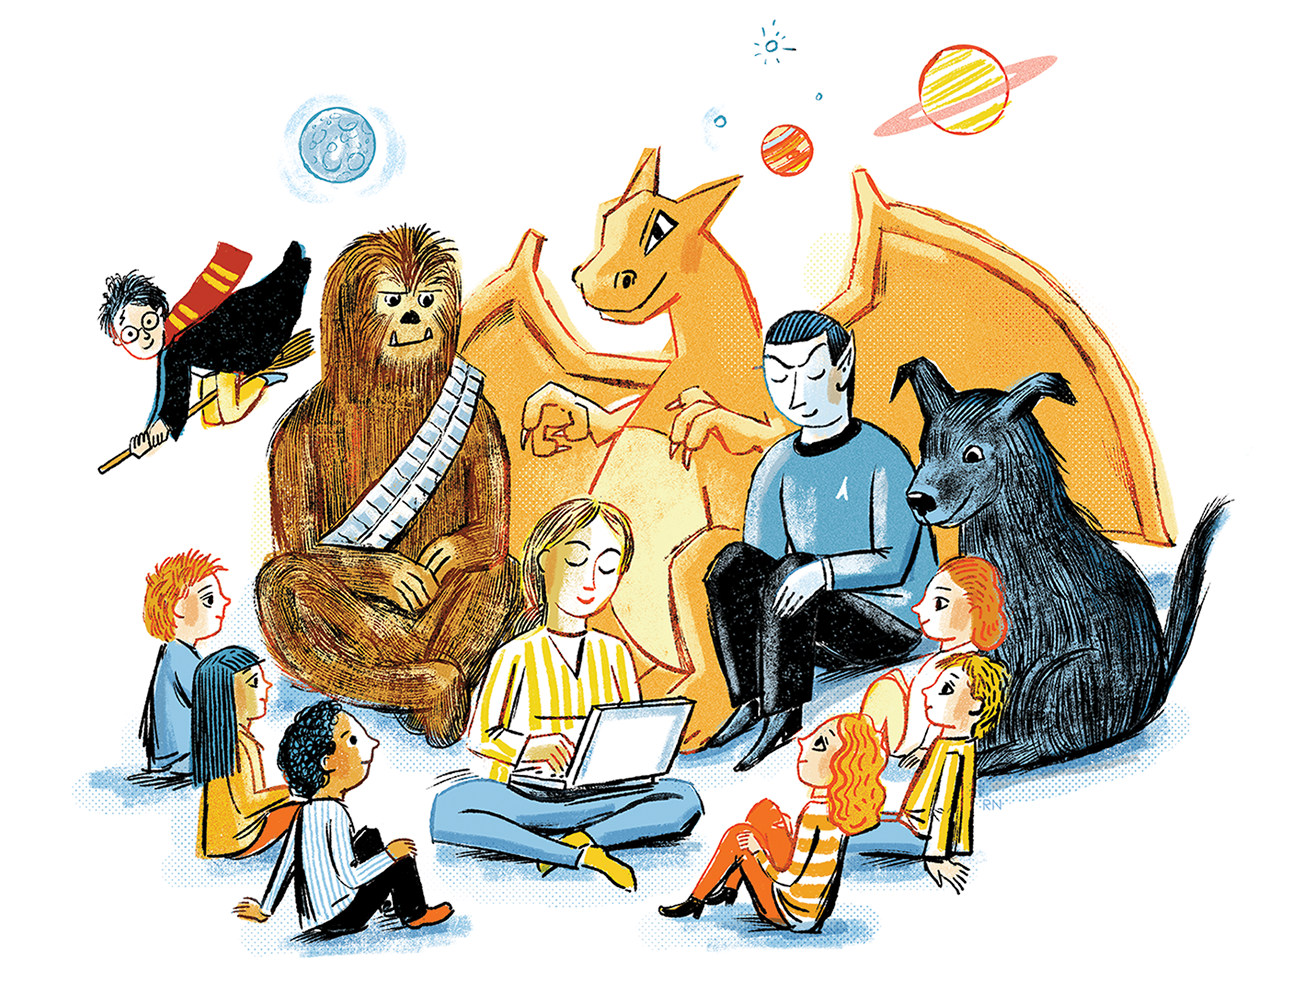 An illustration of online teacher Lauren Ard surrounded by fantasy characters like Chewbacca, Harry Potter, a dragon, and Spock.